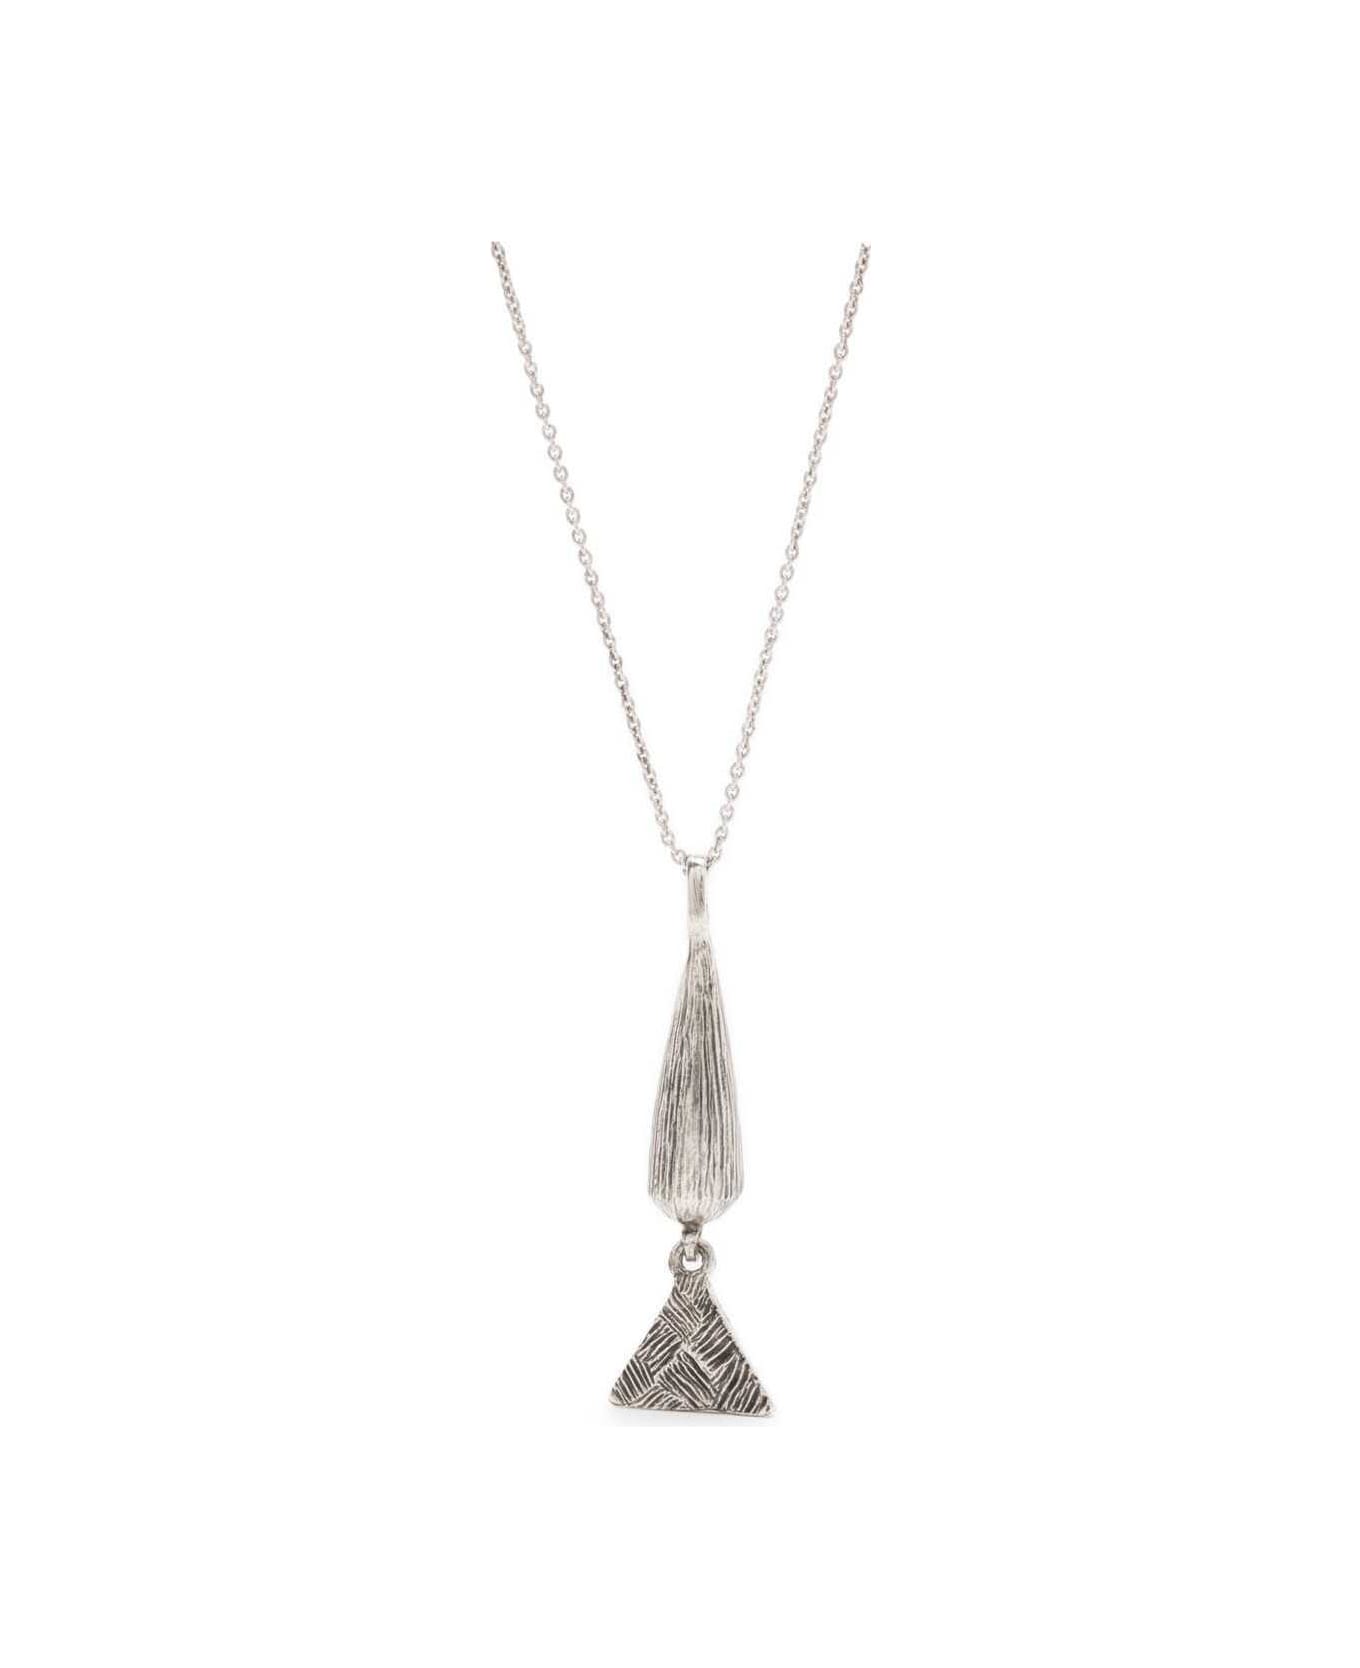 Saint Laurent Long Silver-colored Chain Necklace With Conical And Triangular Charm In Brass Man - Metallic ネックレス